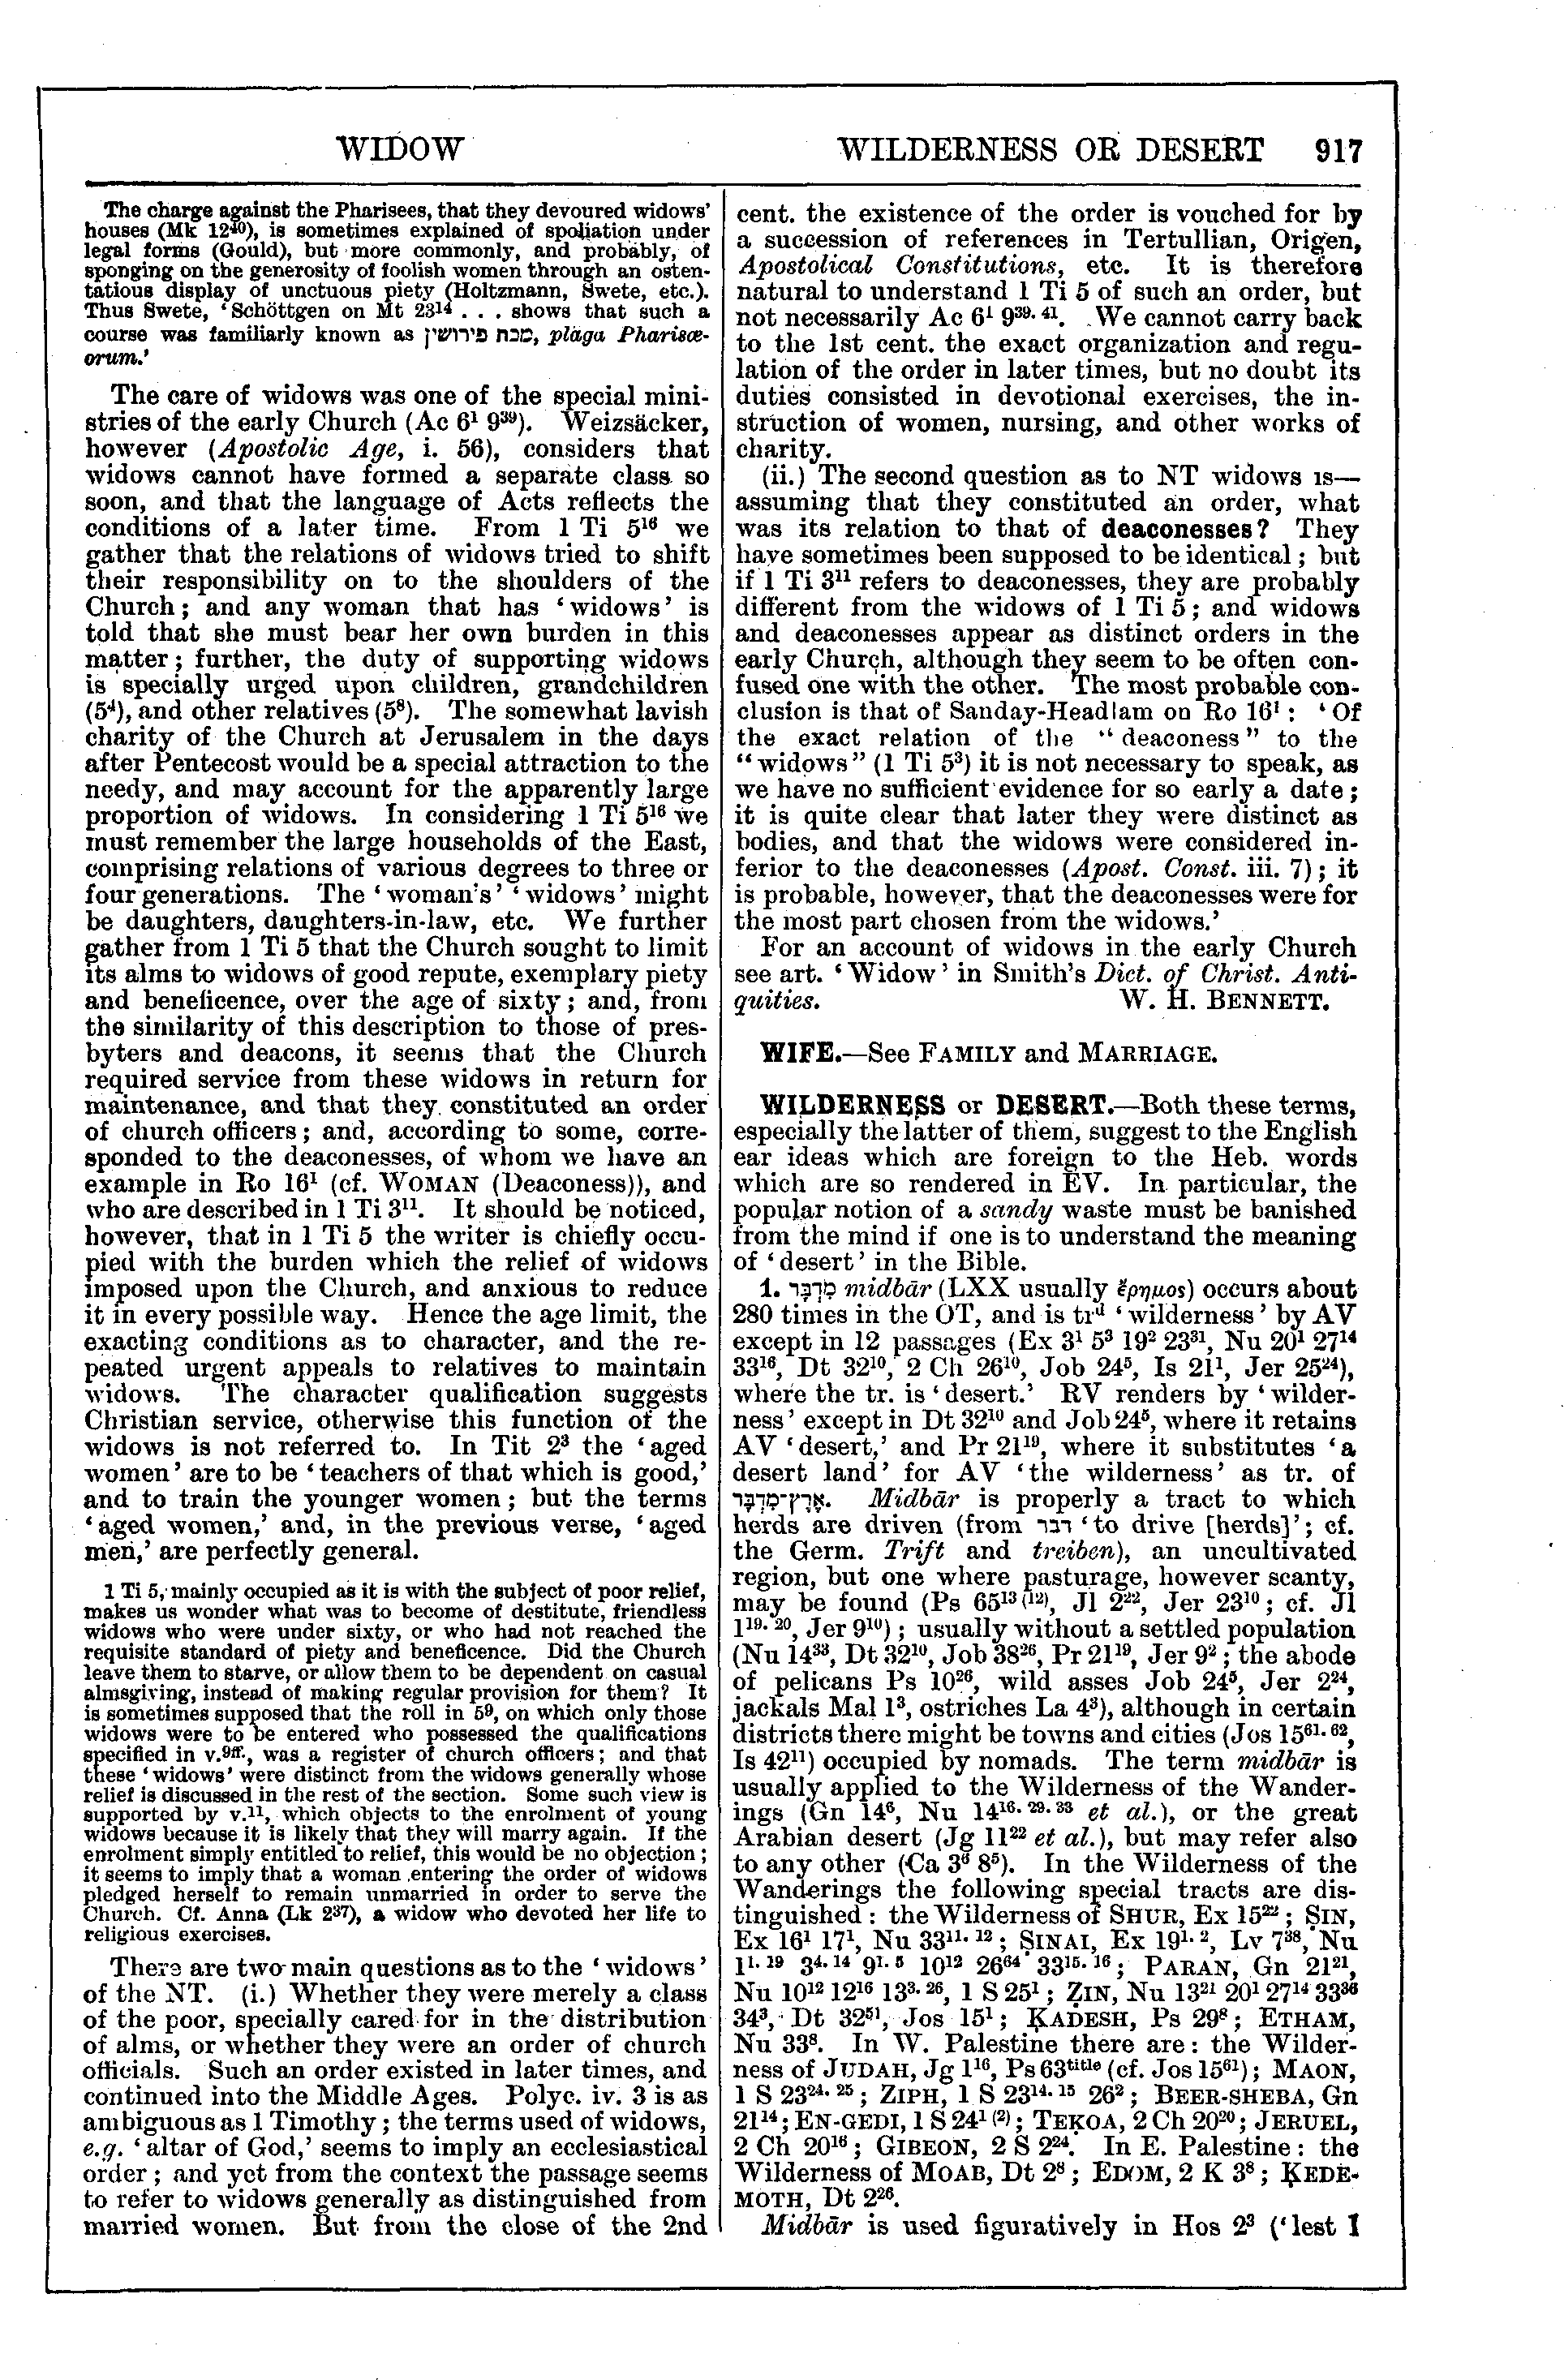 Image of page 917